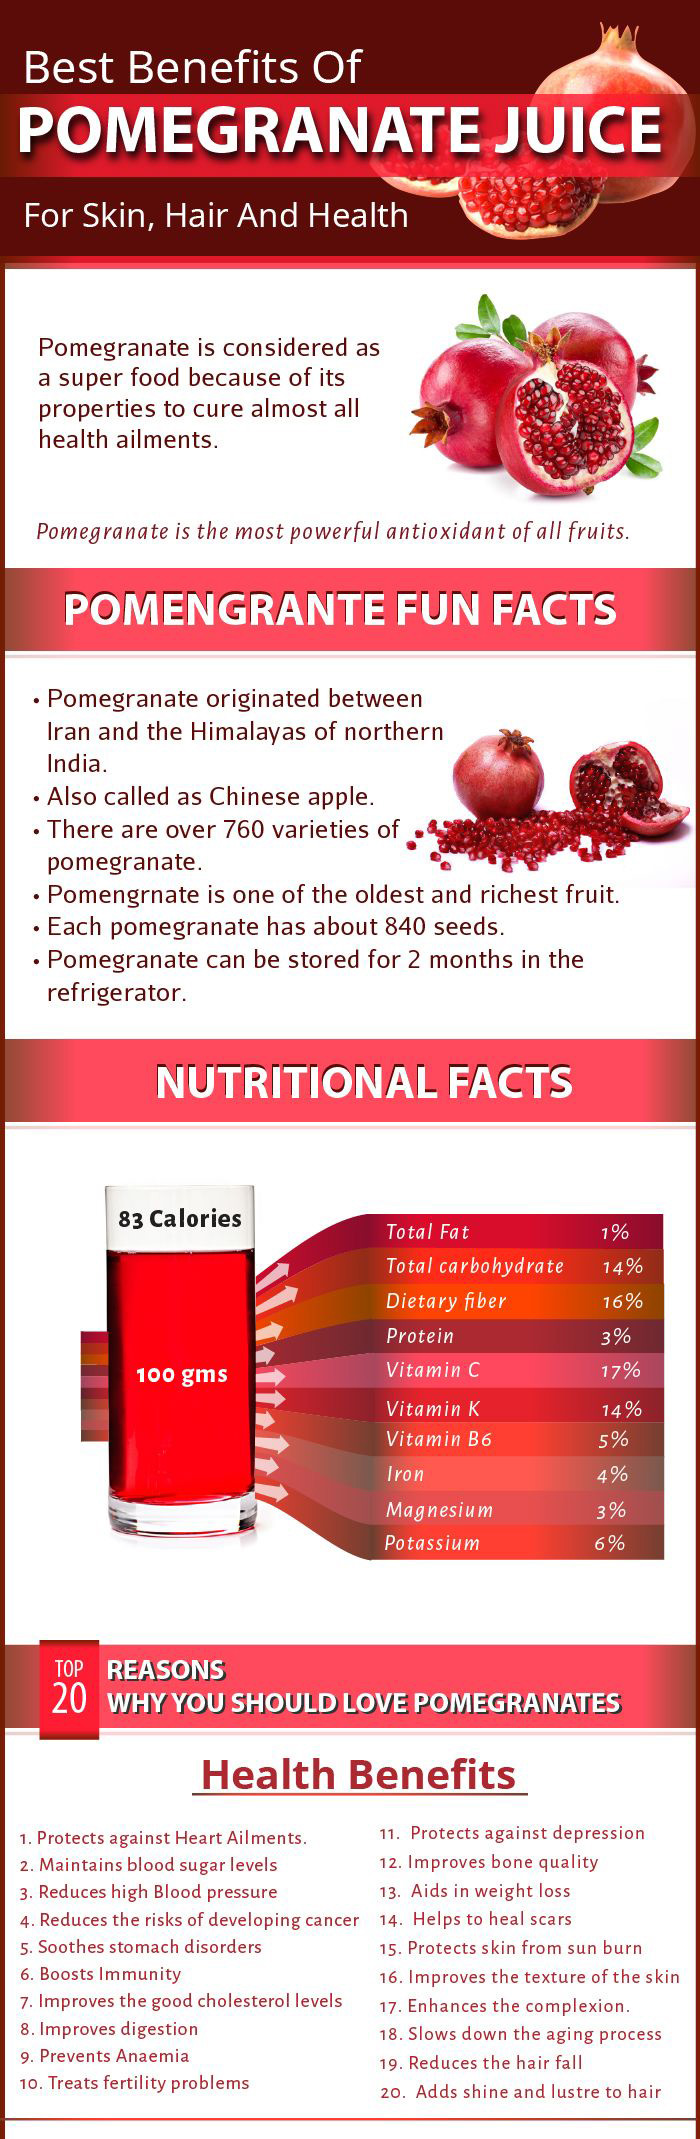 The Benefits Of Pomegranate Juice For Your Skin, Hair And Health Infographic